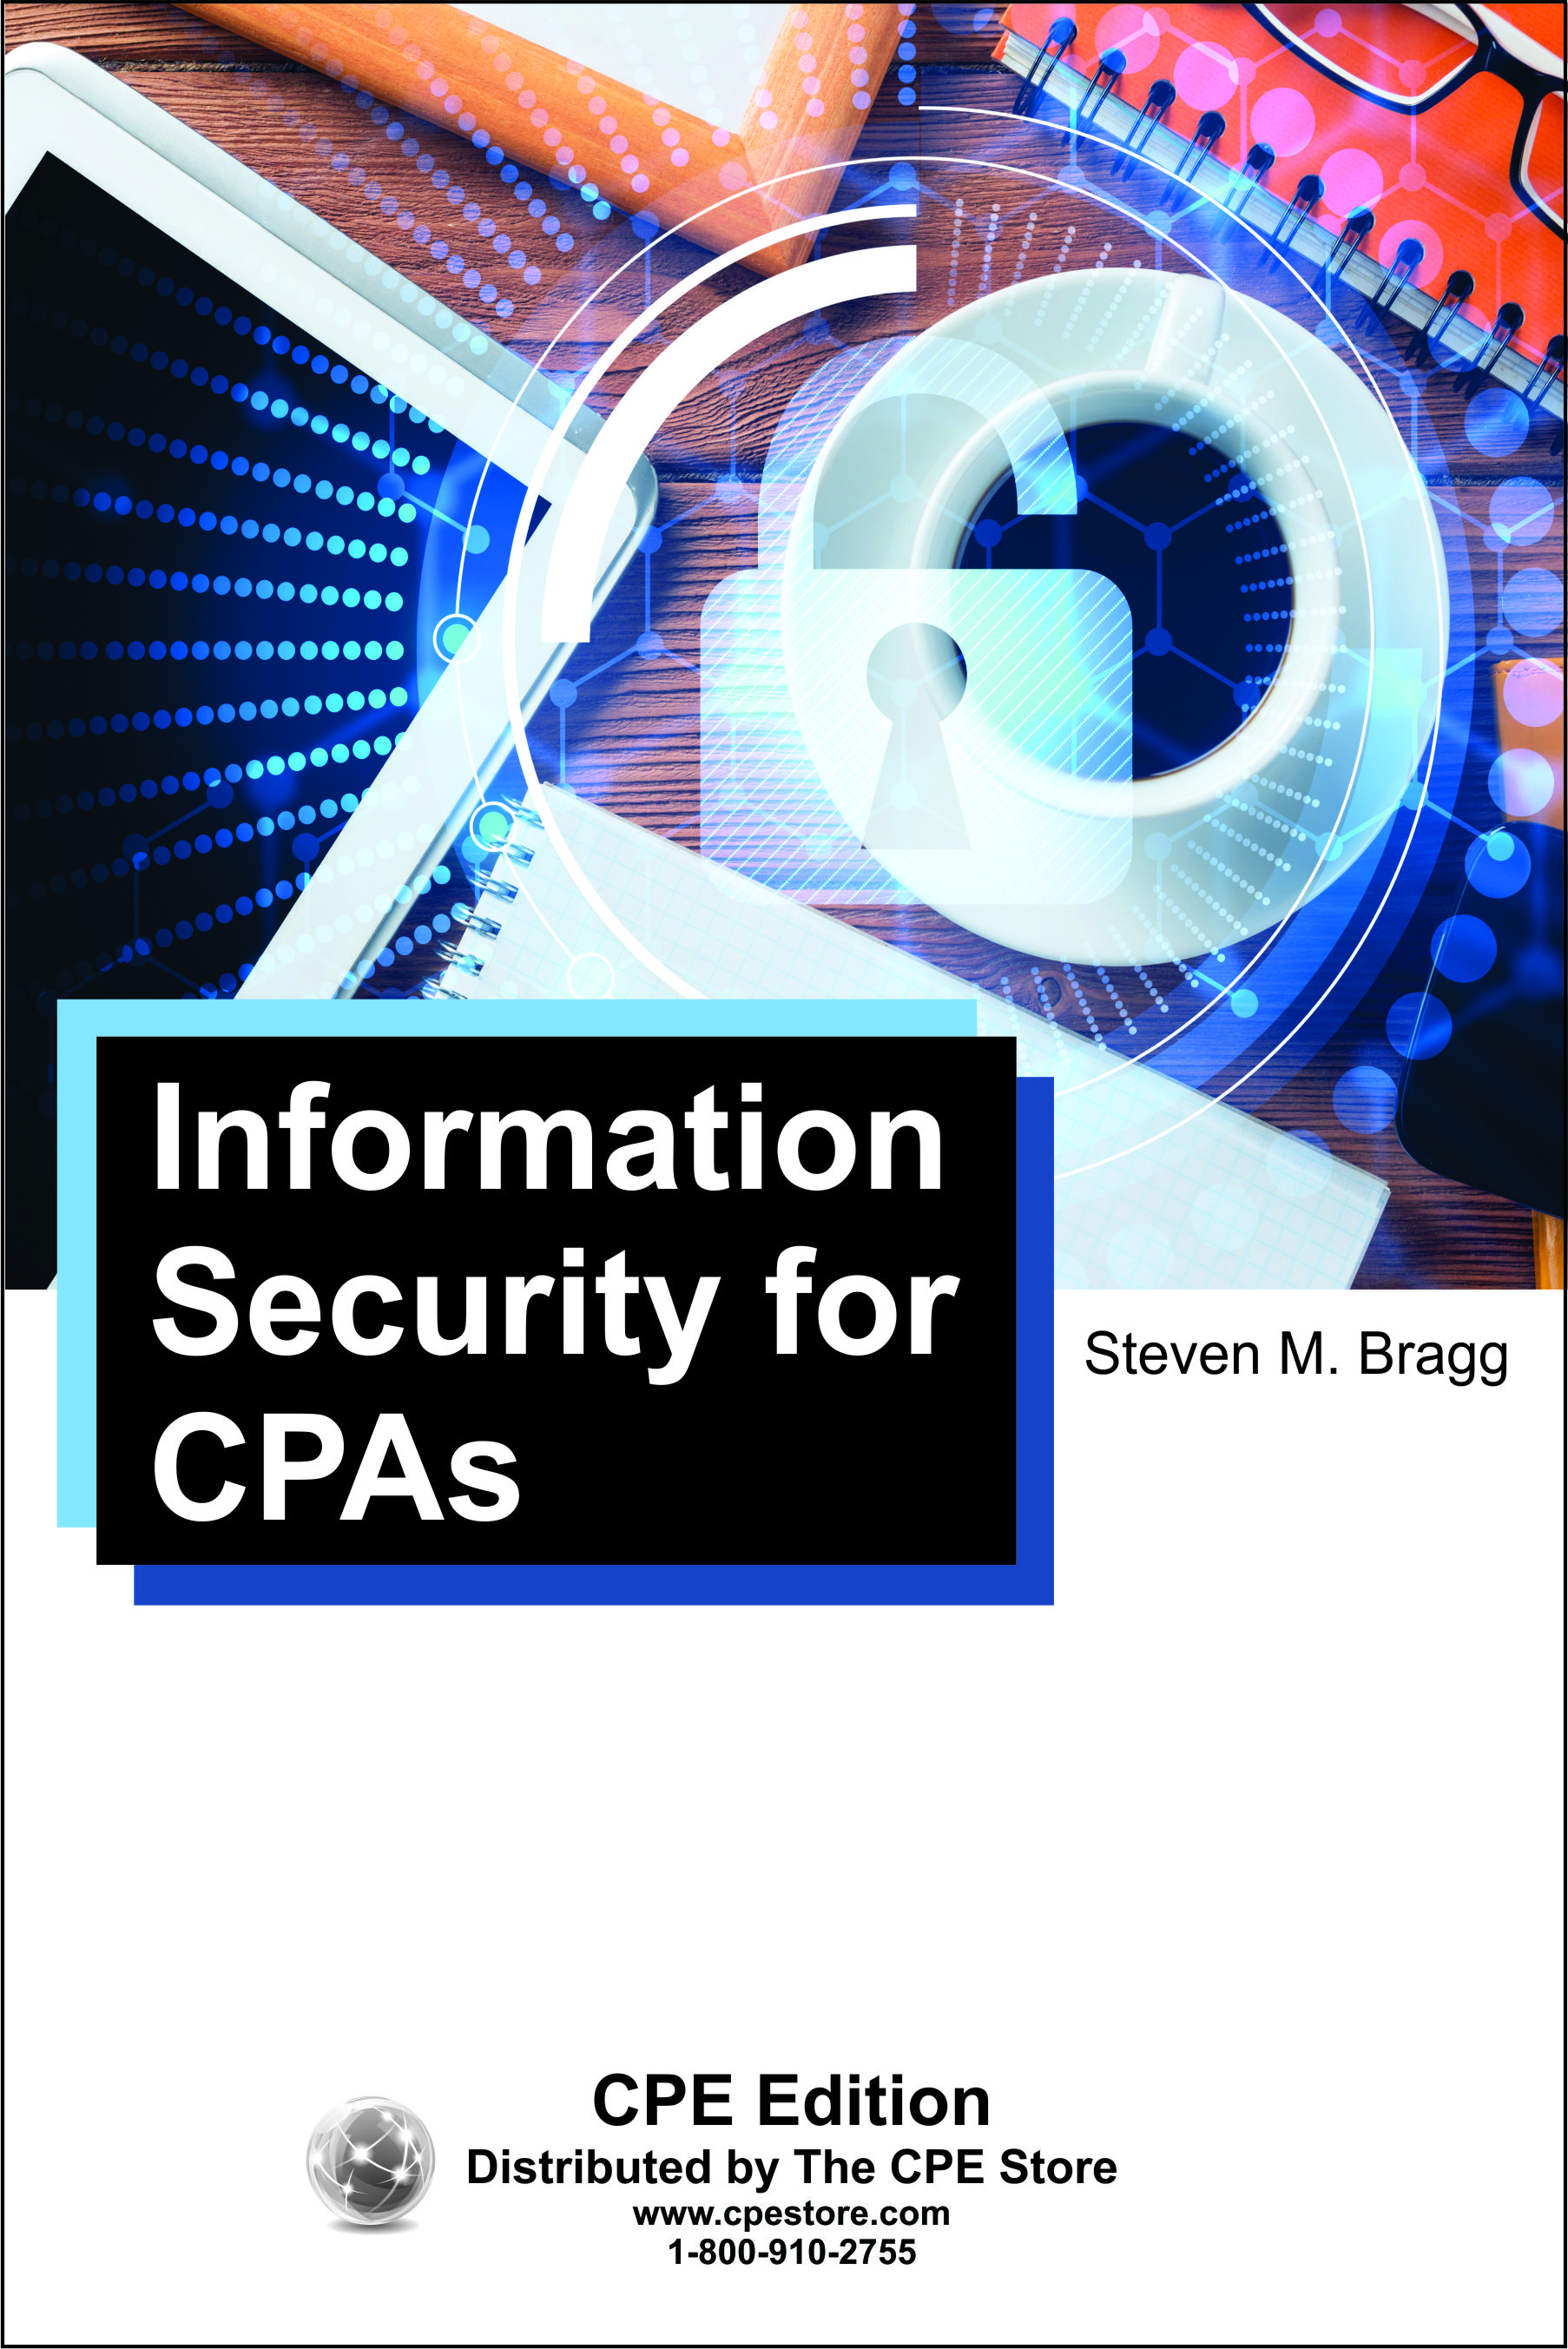 Information Security for CPAs